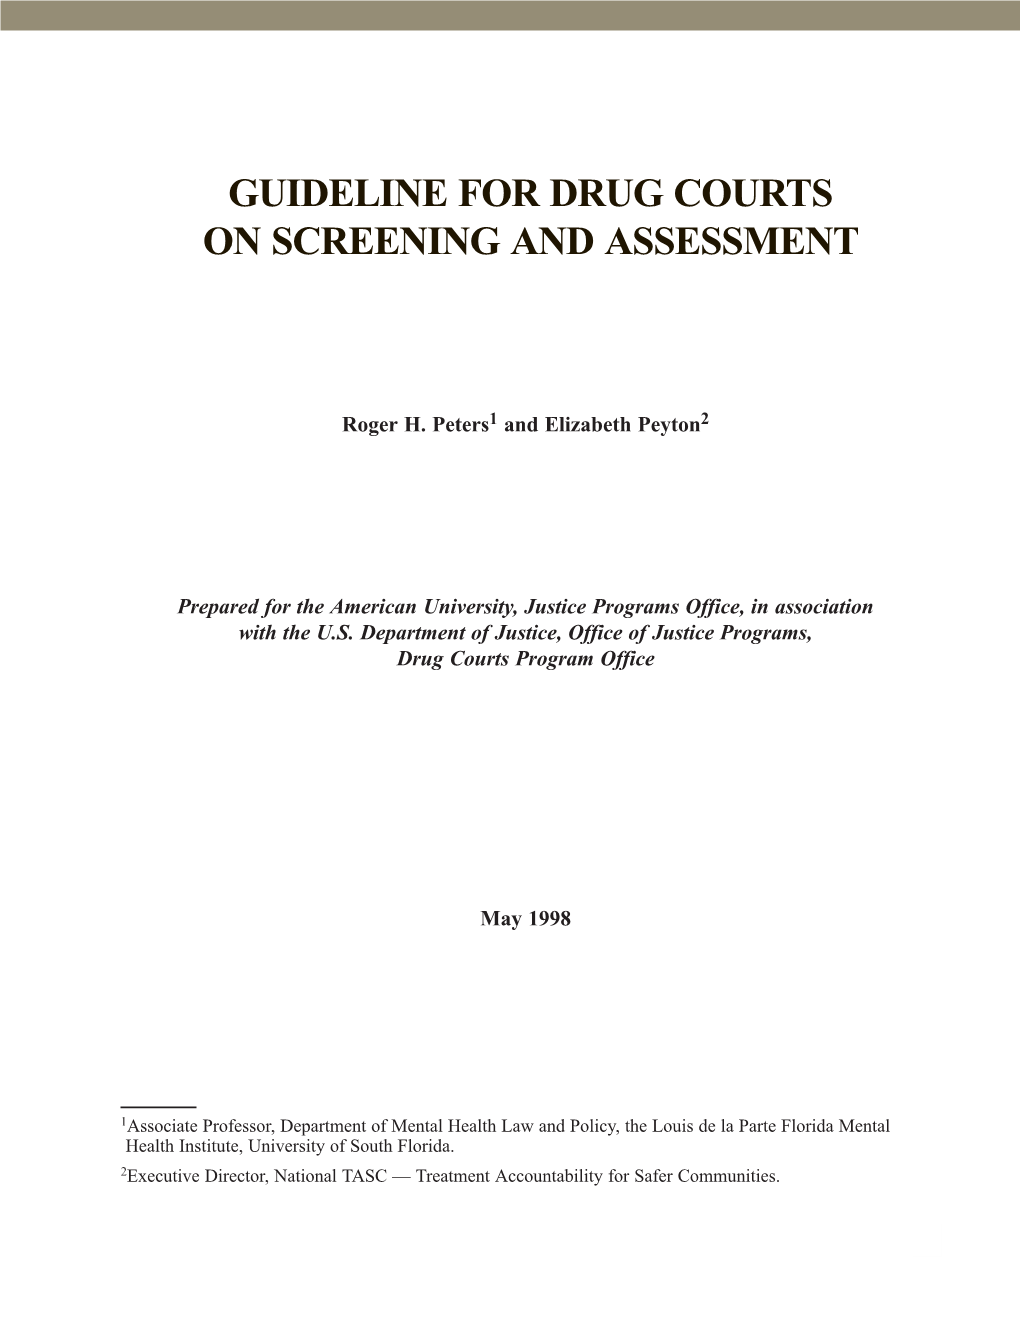 Guideline for Drug Courts on Screening and Assessment DocsLib